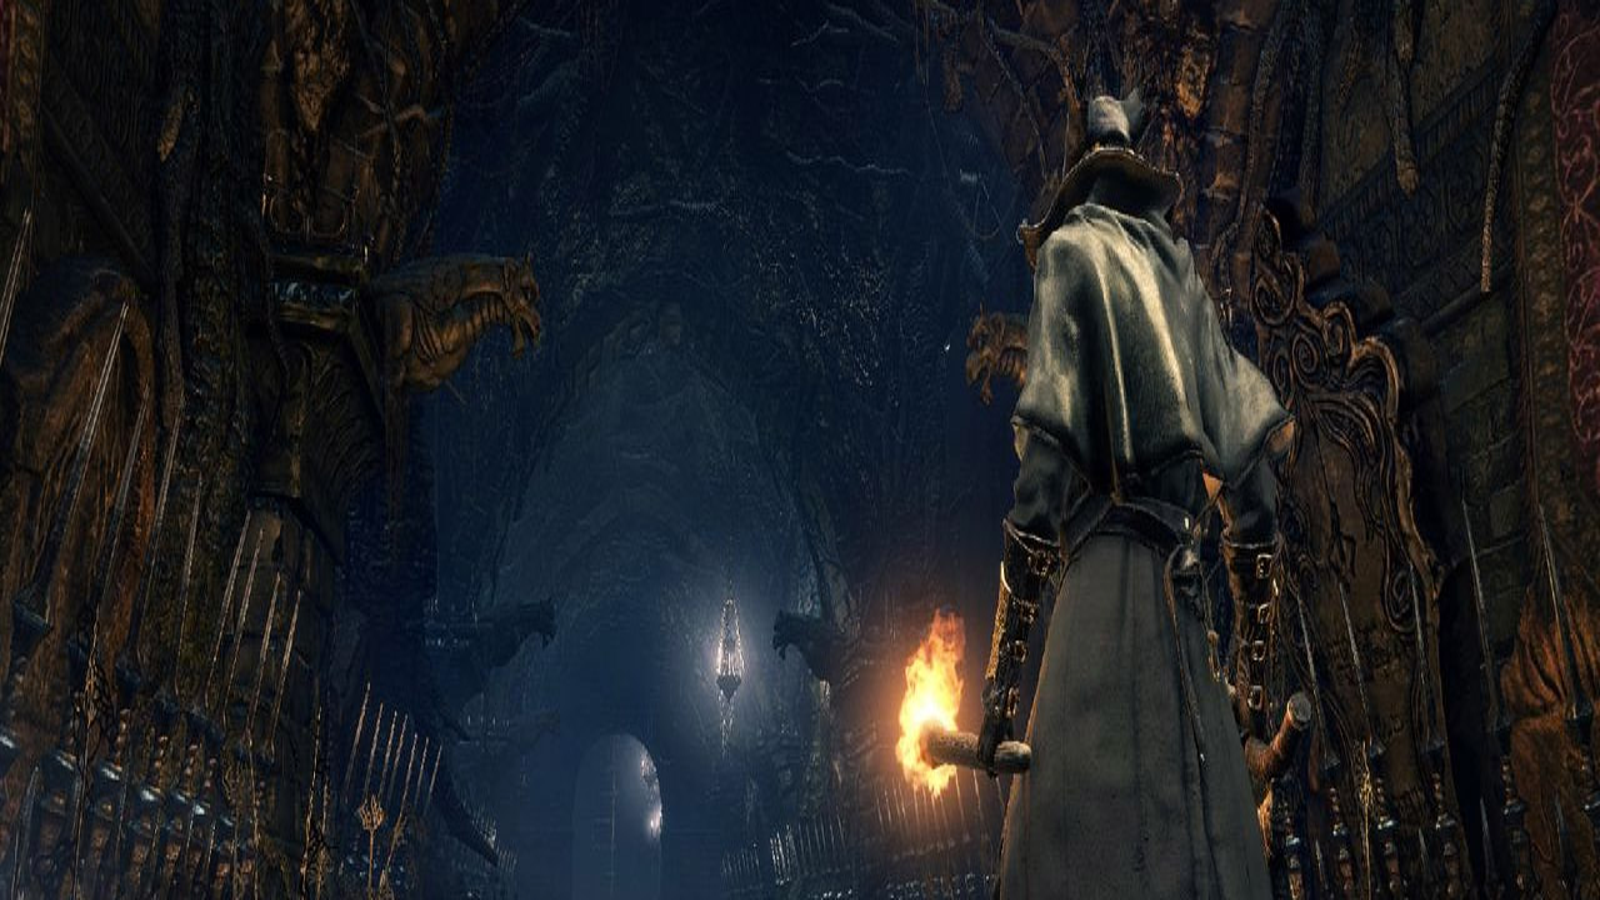 Bloodborne PSX May Look Old, But It Offers Something New